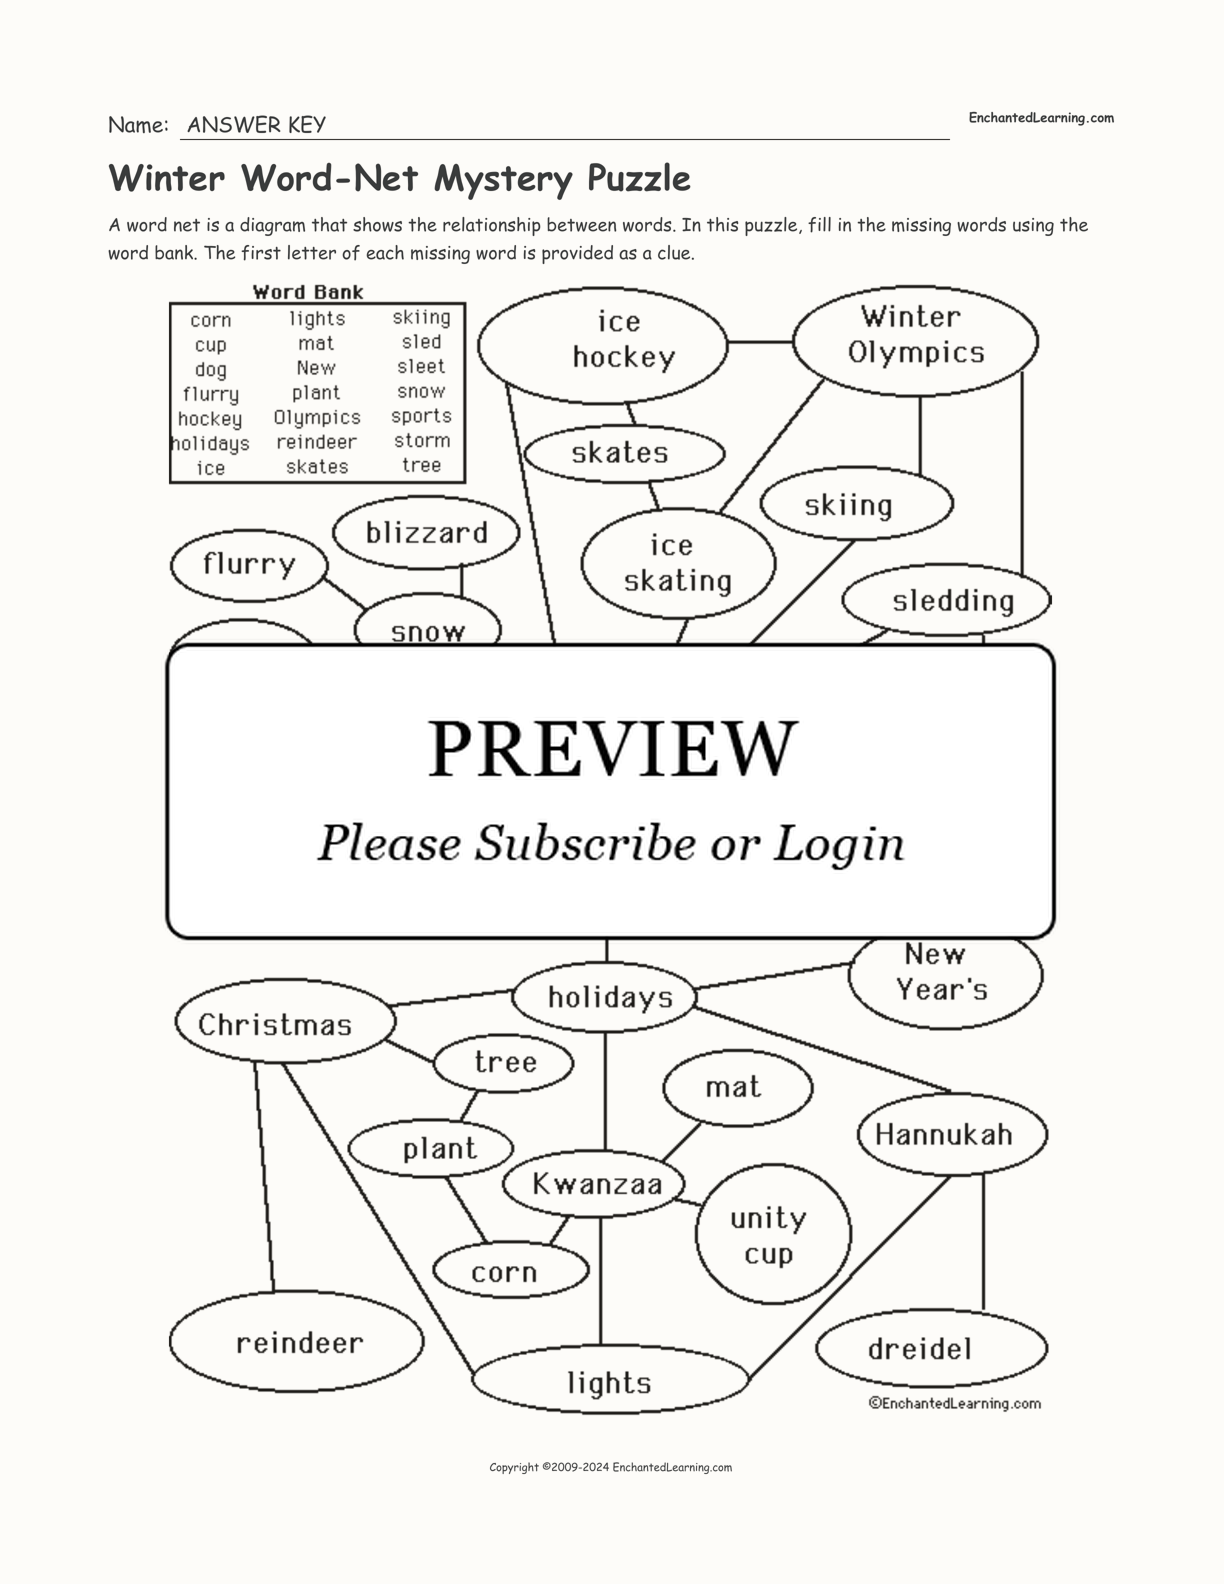 Winter Word-Net Mystery Puzzle interactive worksheet page 2